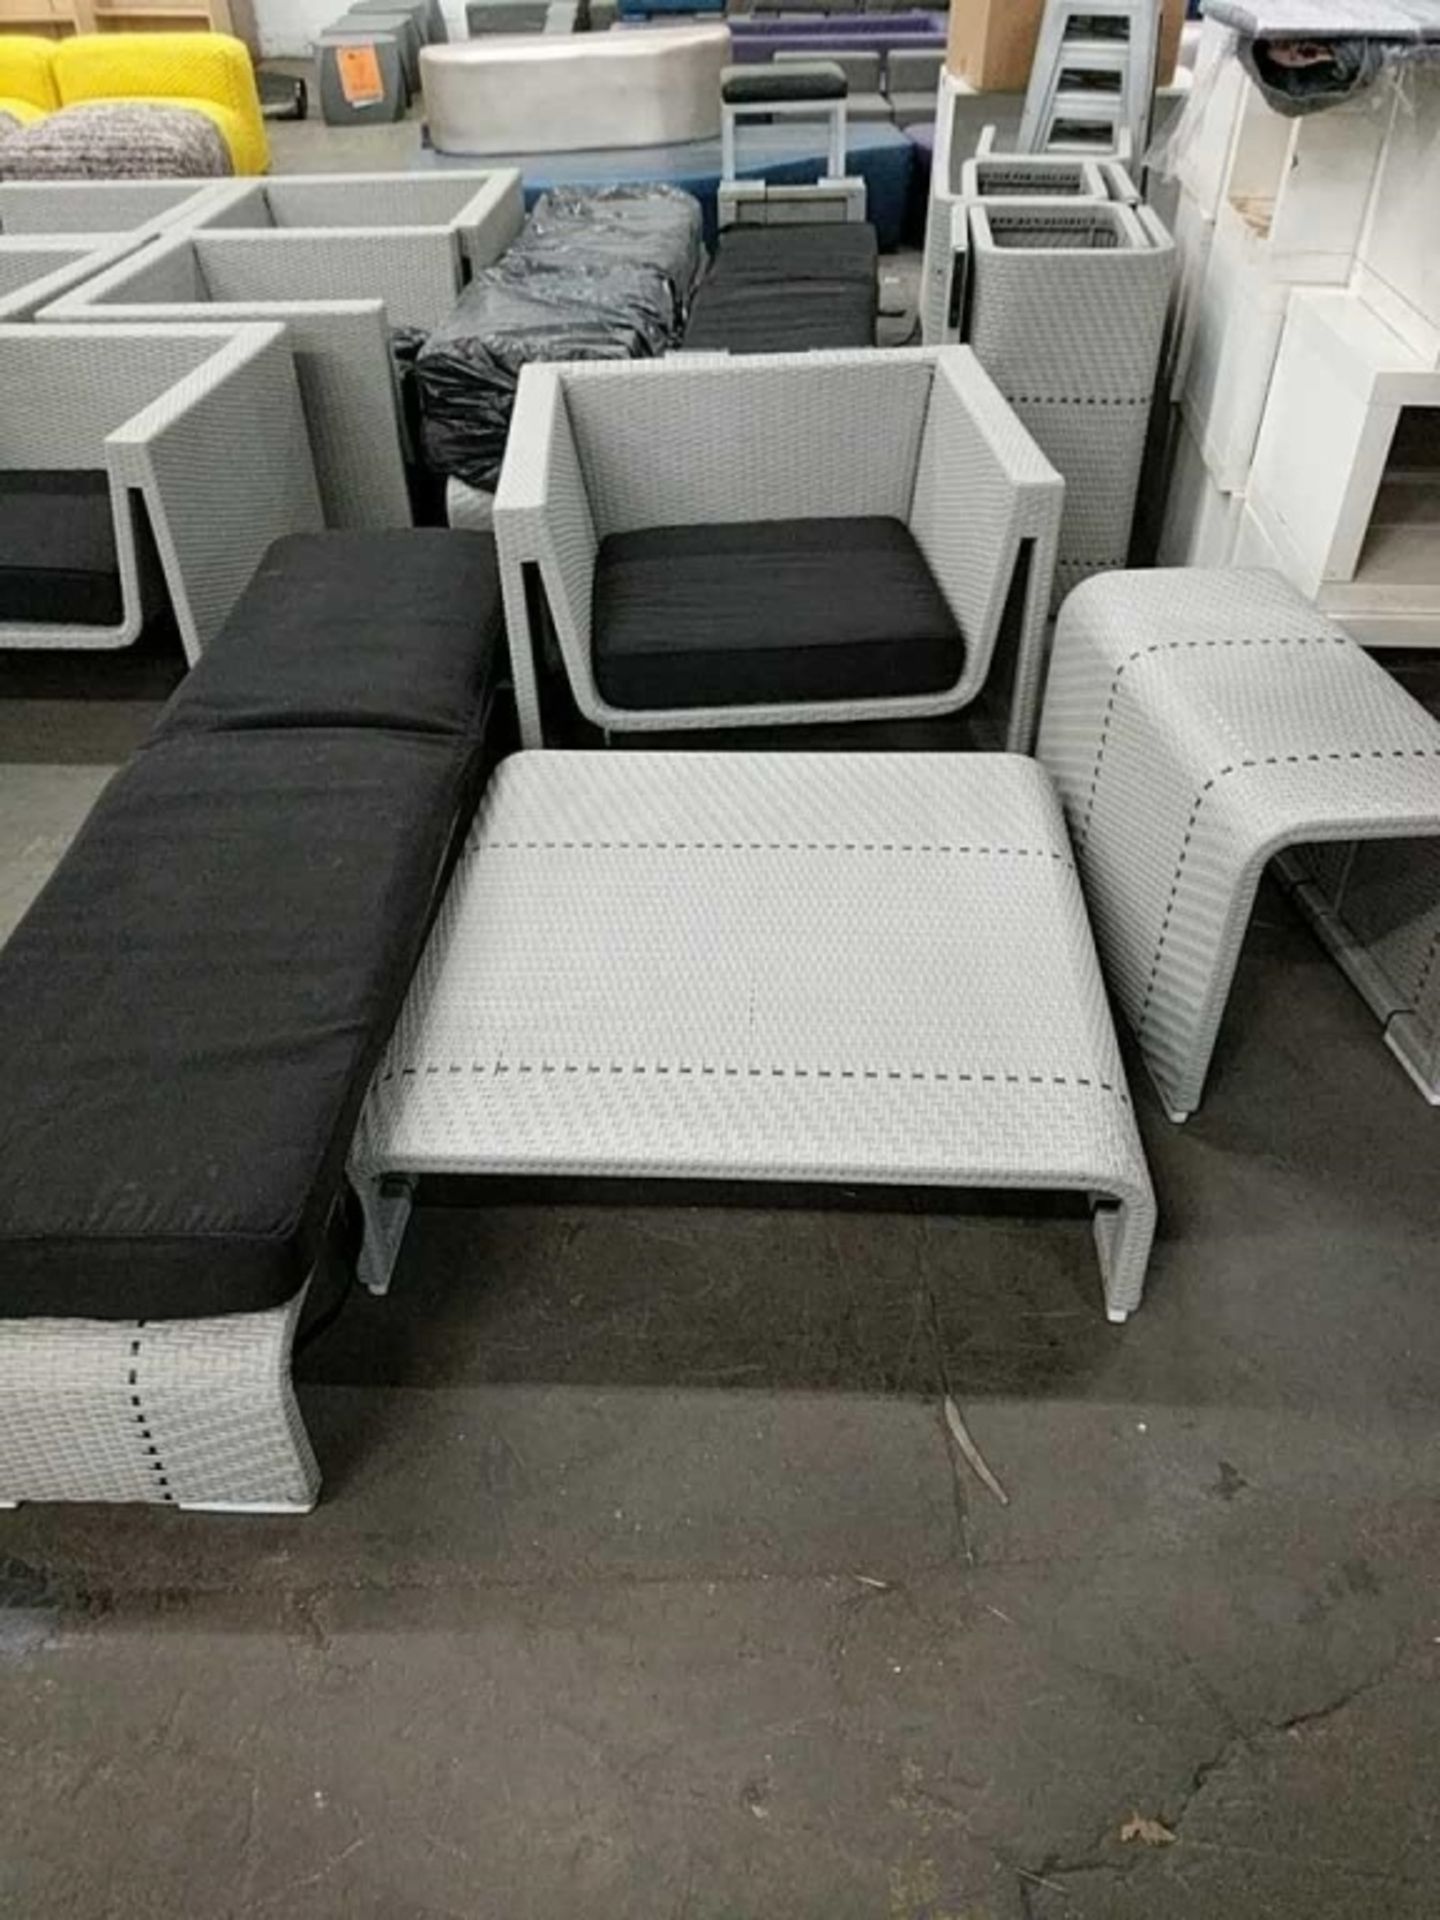 4 Piece set of Outdoor Wicker Furniture - Image 6 of 6